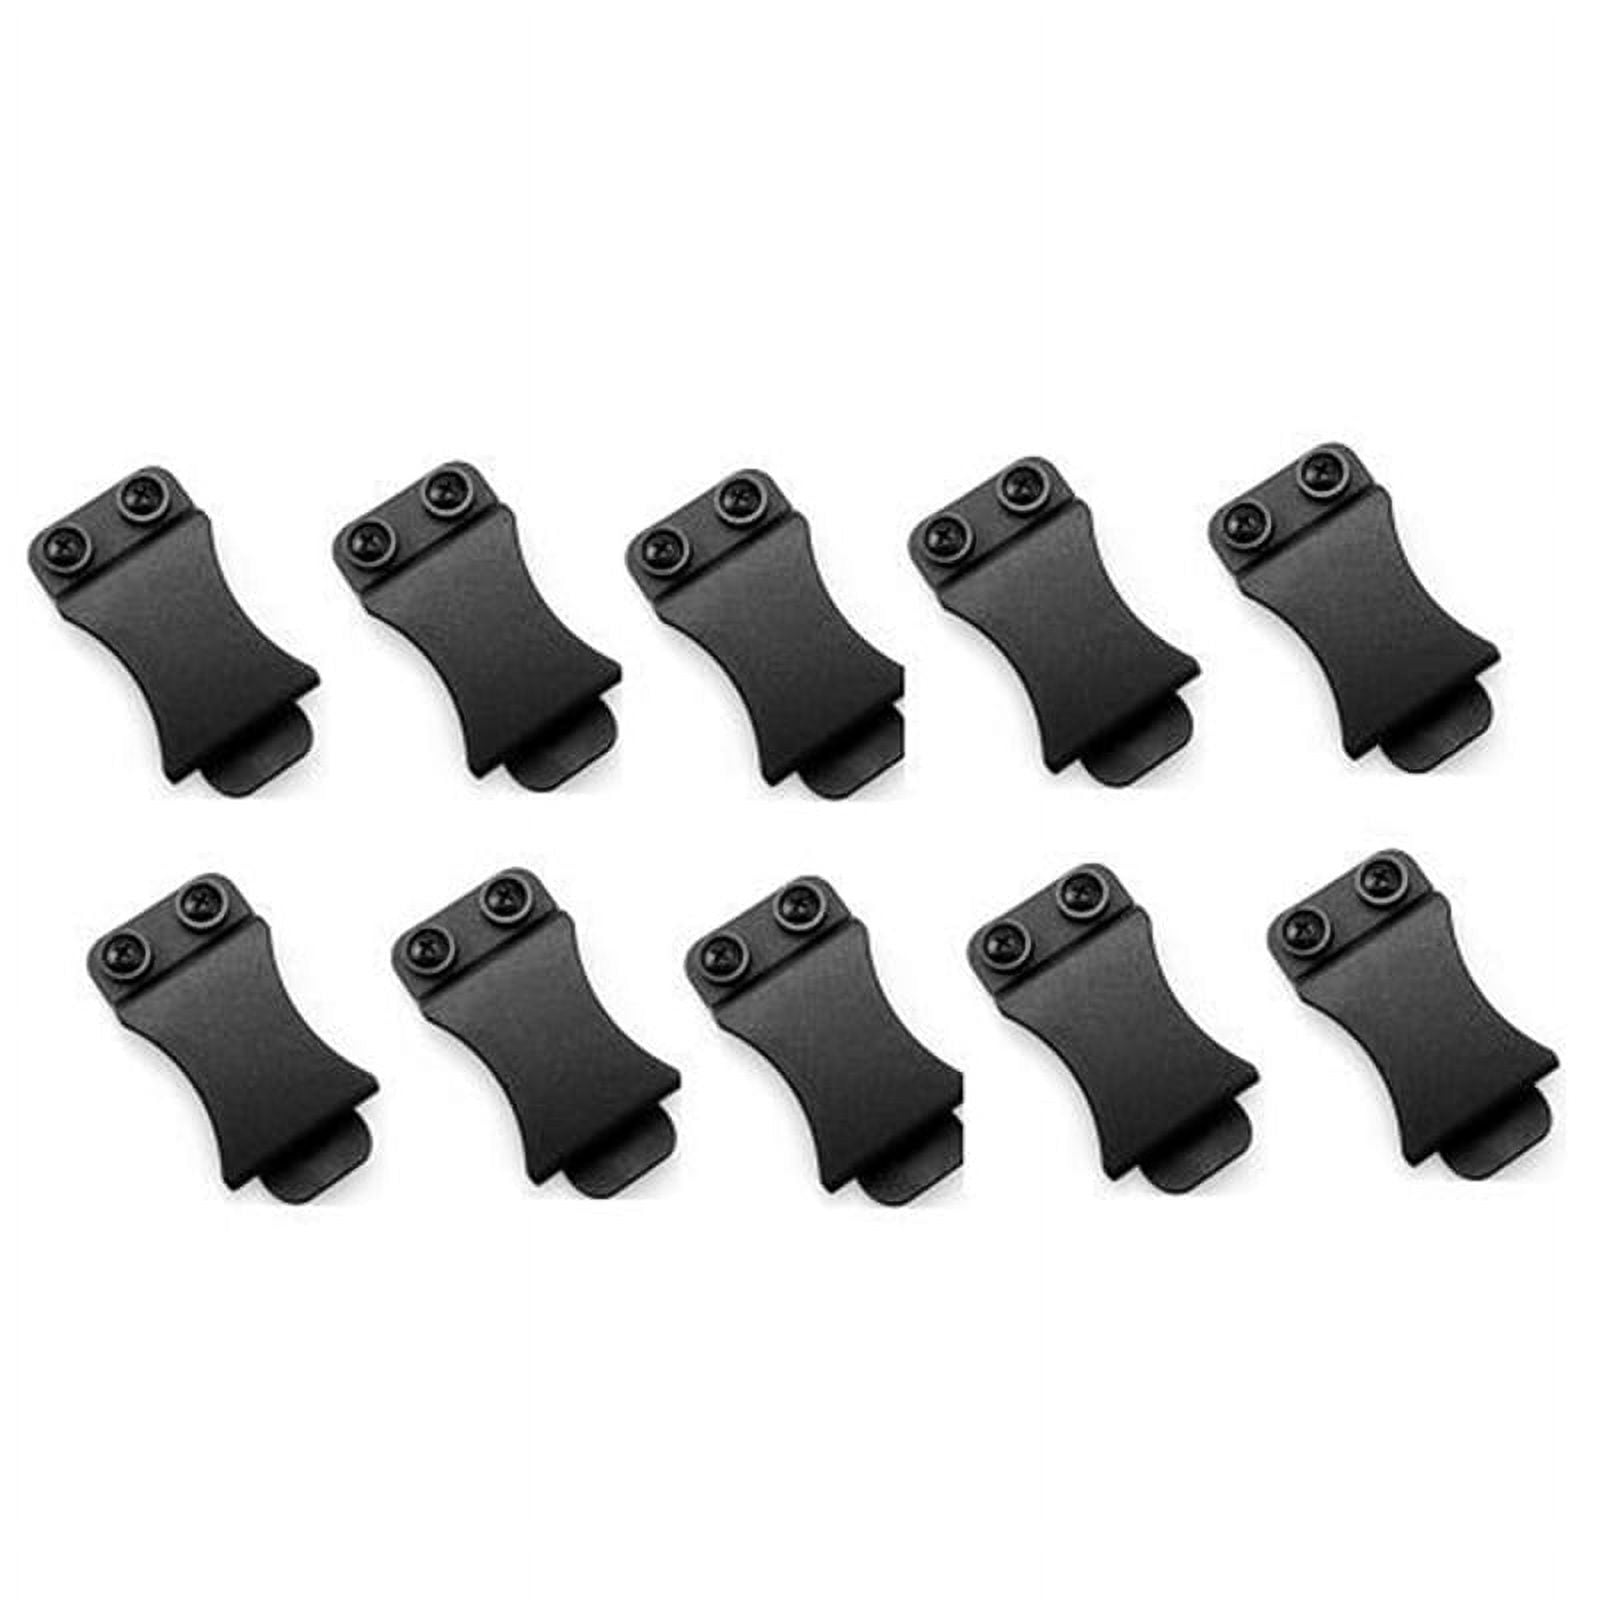 NOBRAND 10pcs/lot Quick Clips for 1.5 inch Belts for Kydex Belt Clip Loop with Screw Fits Applications Tool Part, Women's, Size: 74, Black